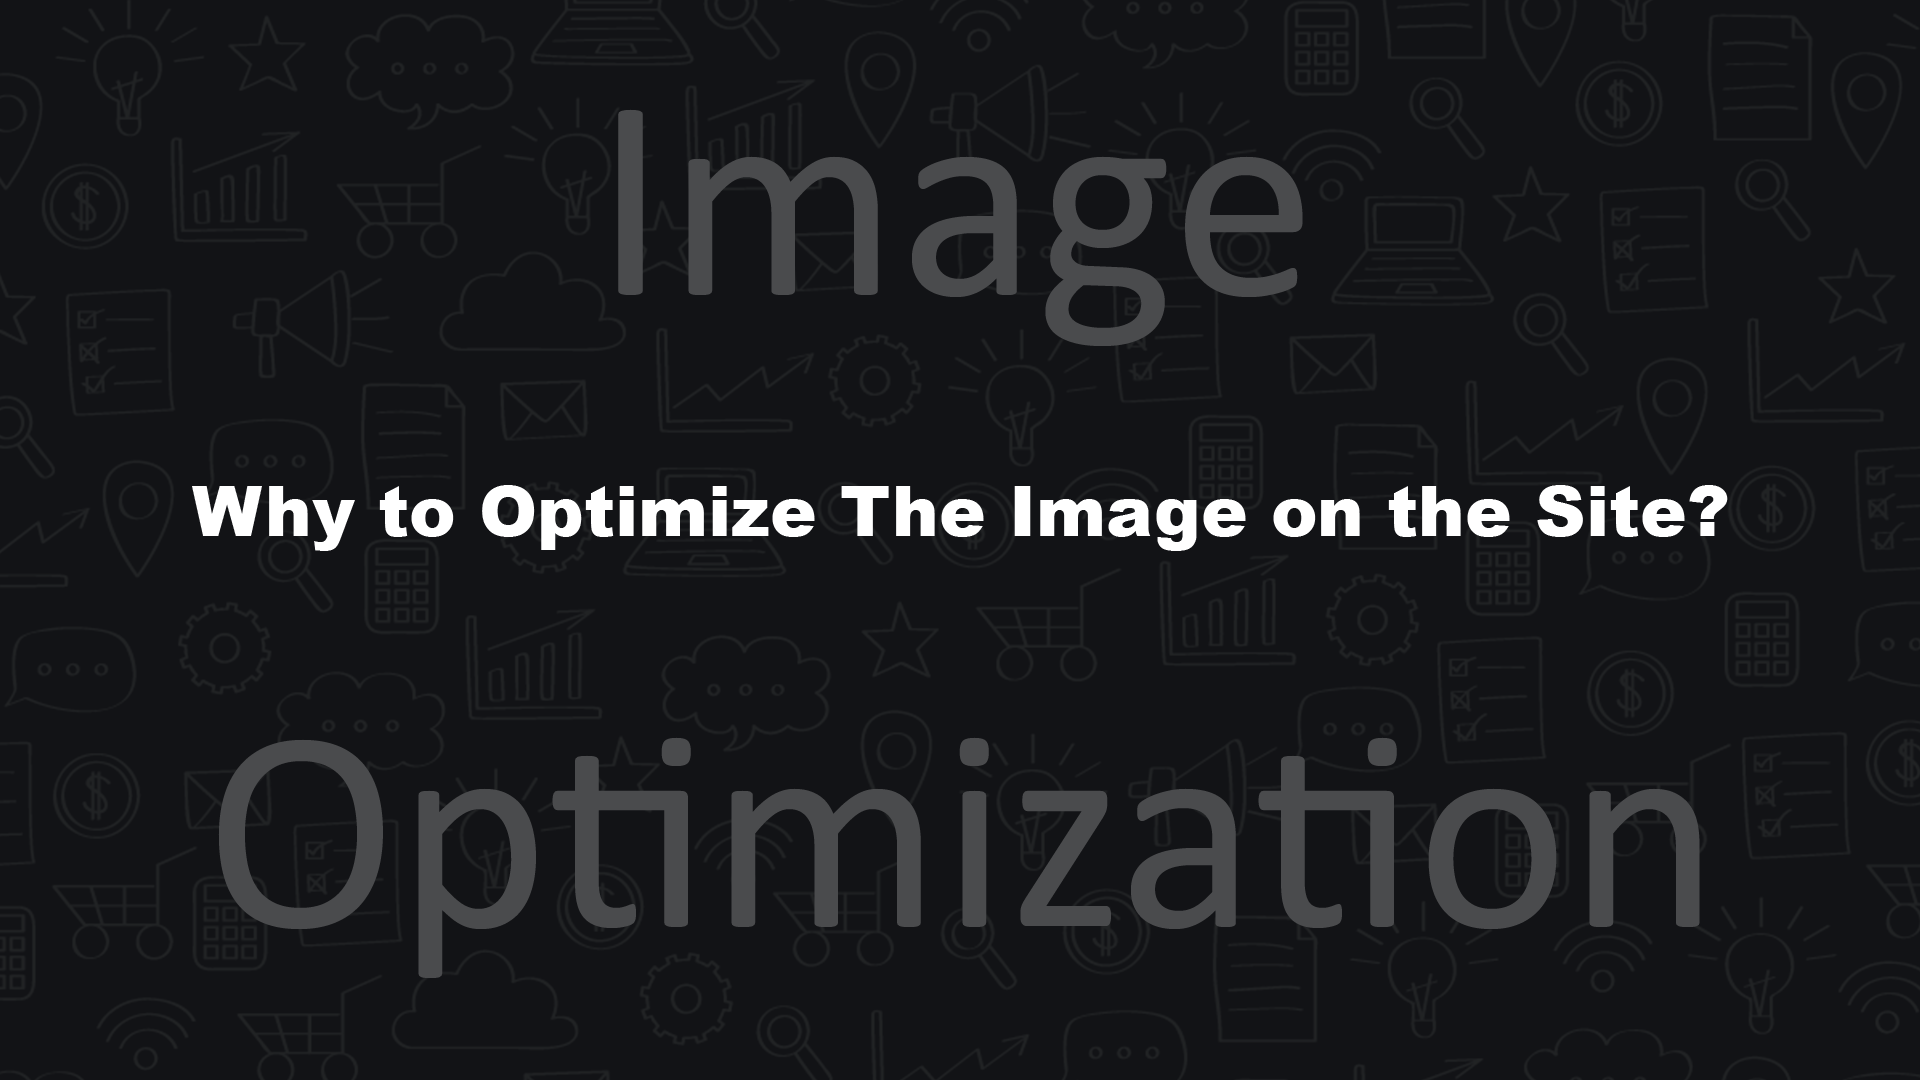 How and why to optimize the image on the site